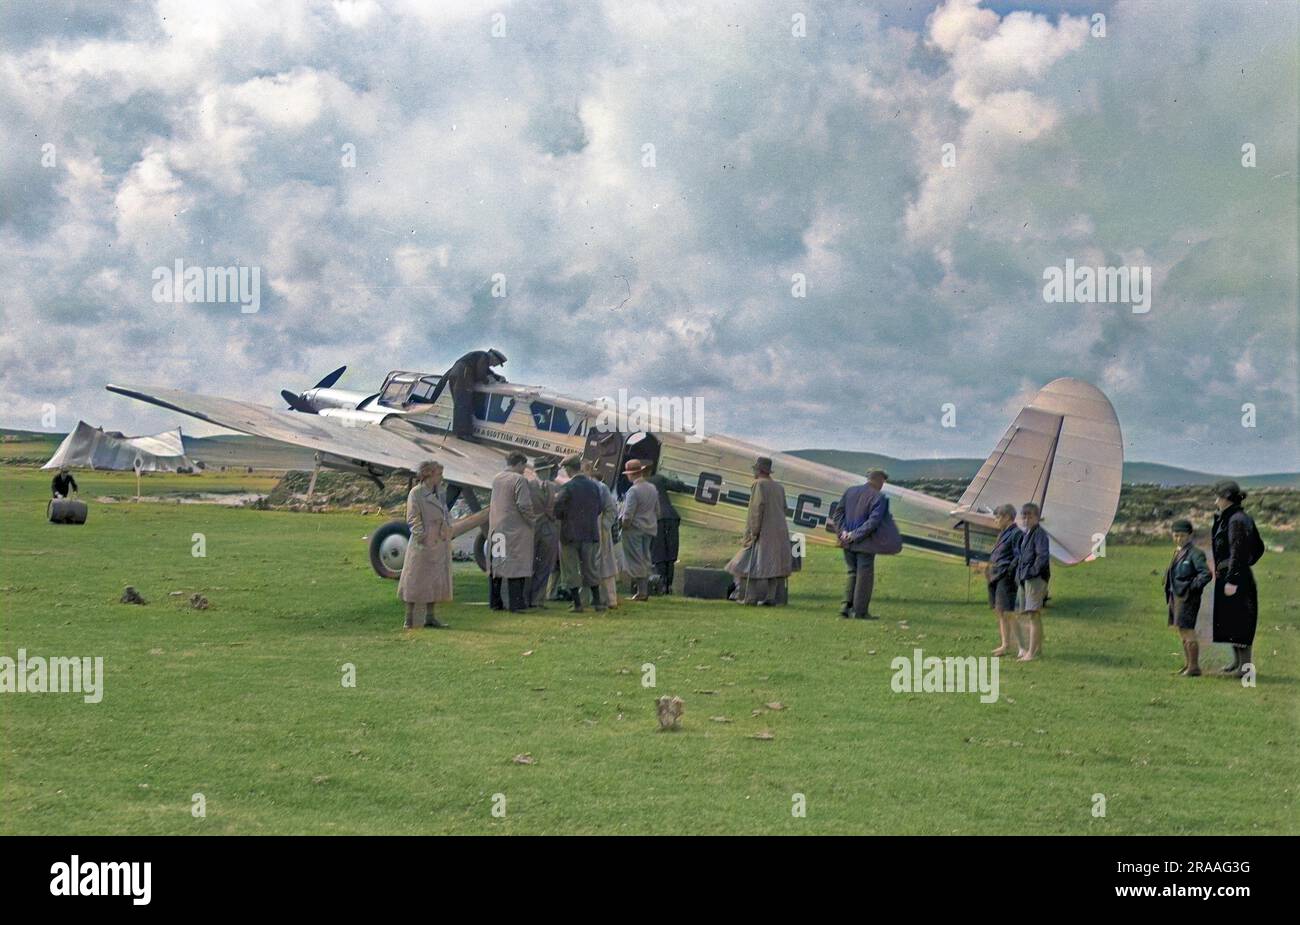 People on an airfield in Scotland with a light aircraft belonging to Northern & Scottish Airways Ltd of Glasgow. The G-ACSM was a Spartan Cruiser with three engines.     Date: 1930s Stock Photo